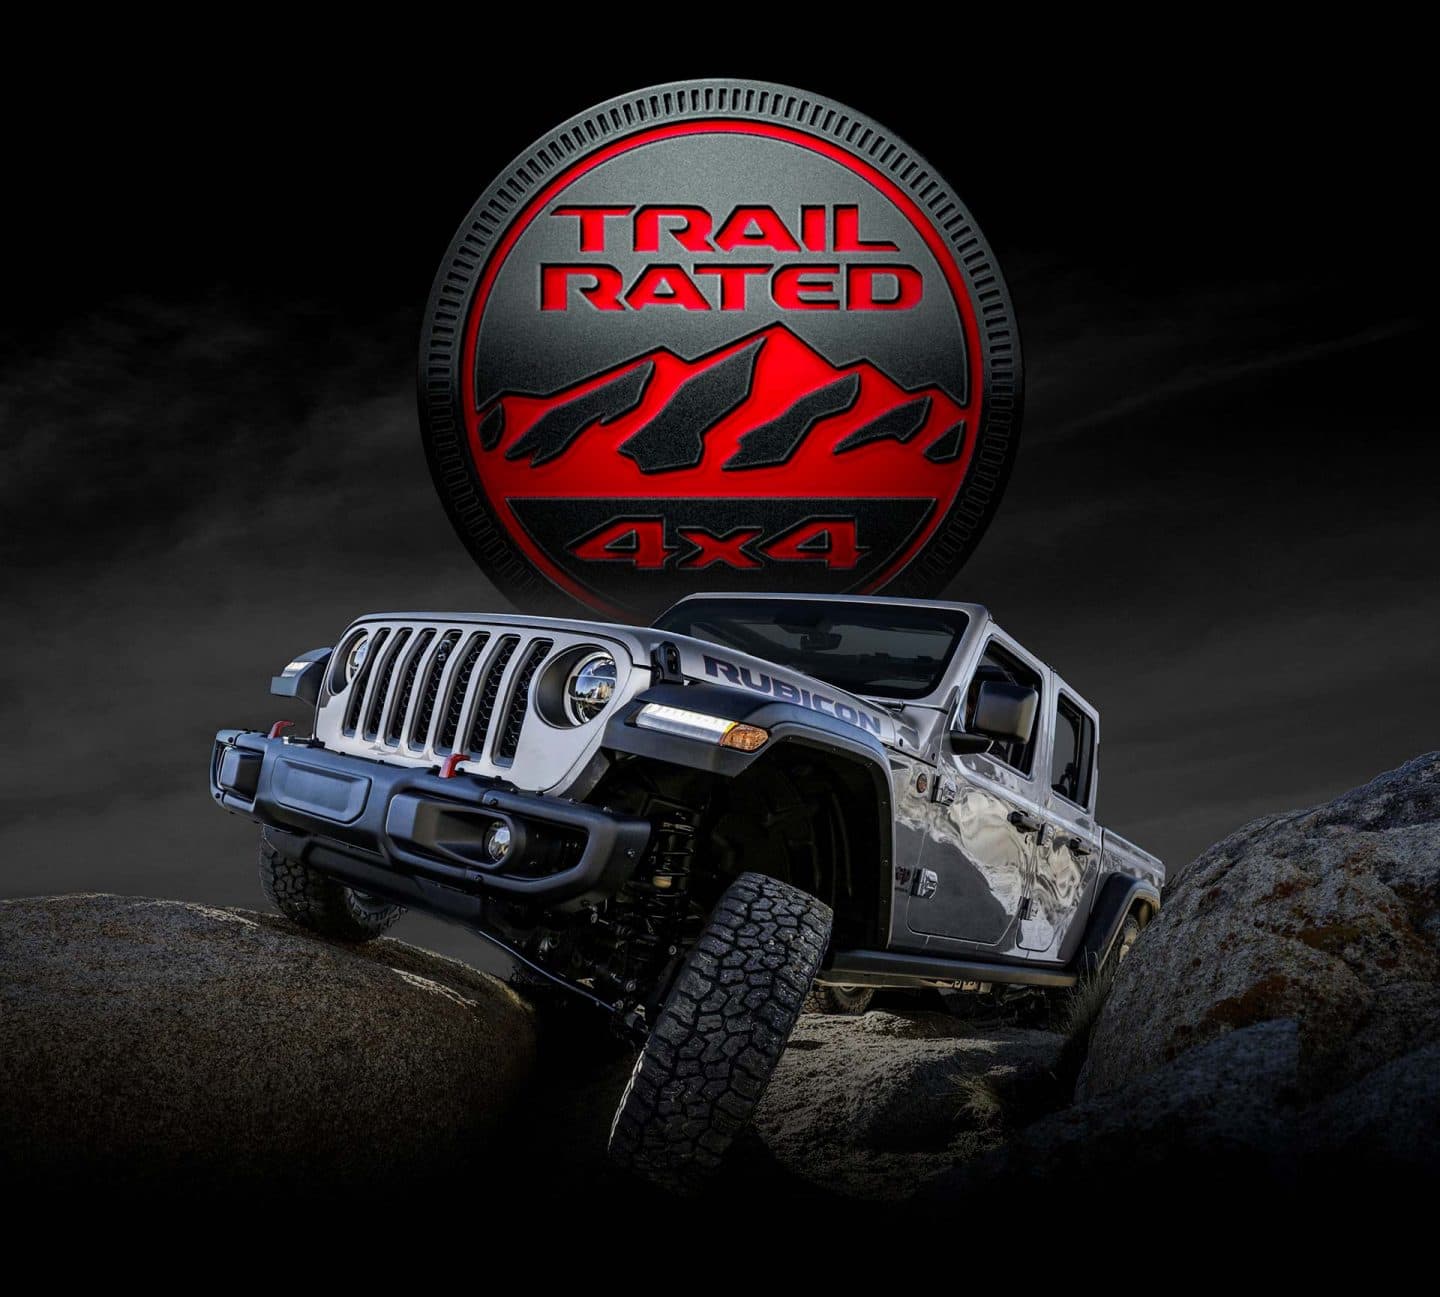 Trail Rated 4x4. The 2023 Jeep Gladiator Rubicon being driven on rocky terrain with one wheel elevated as it climbs a boulder.